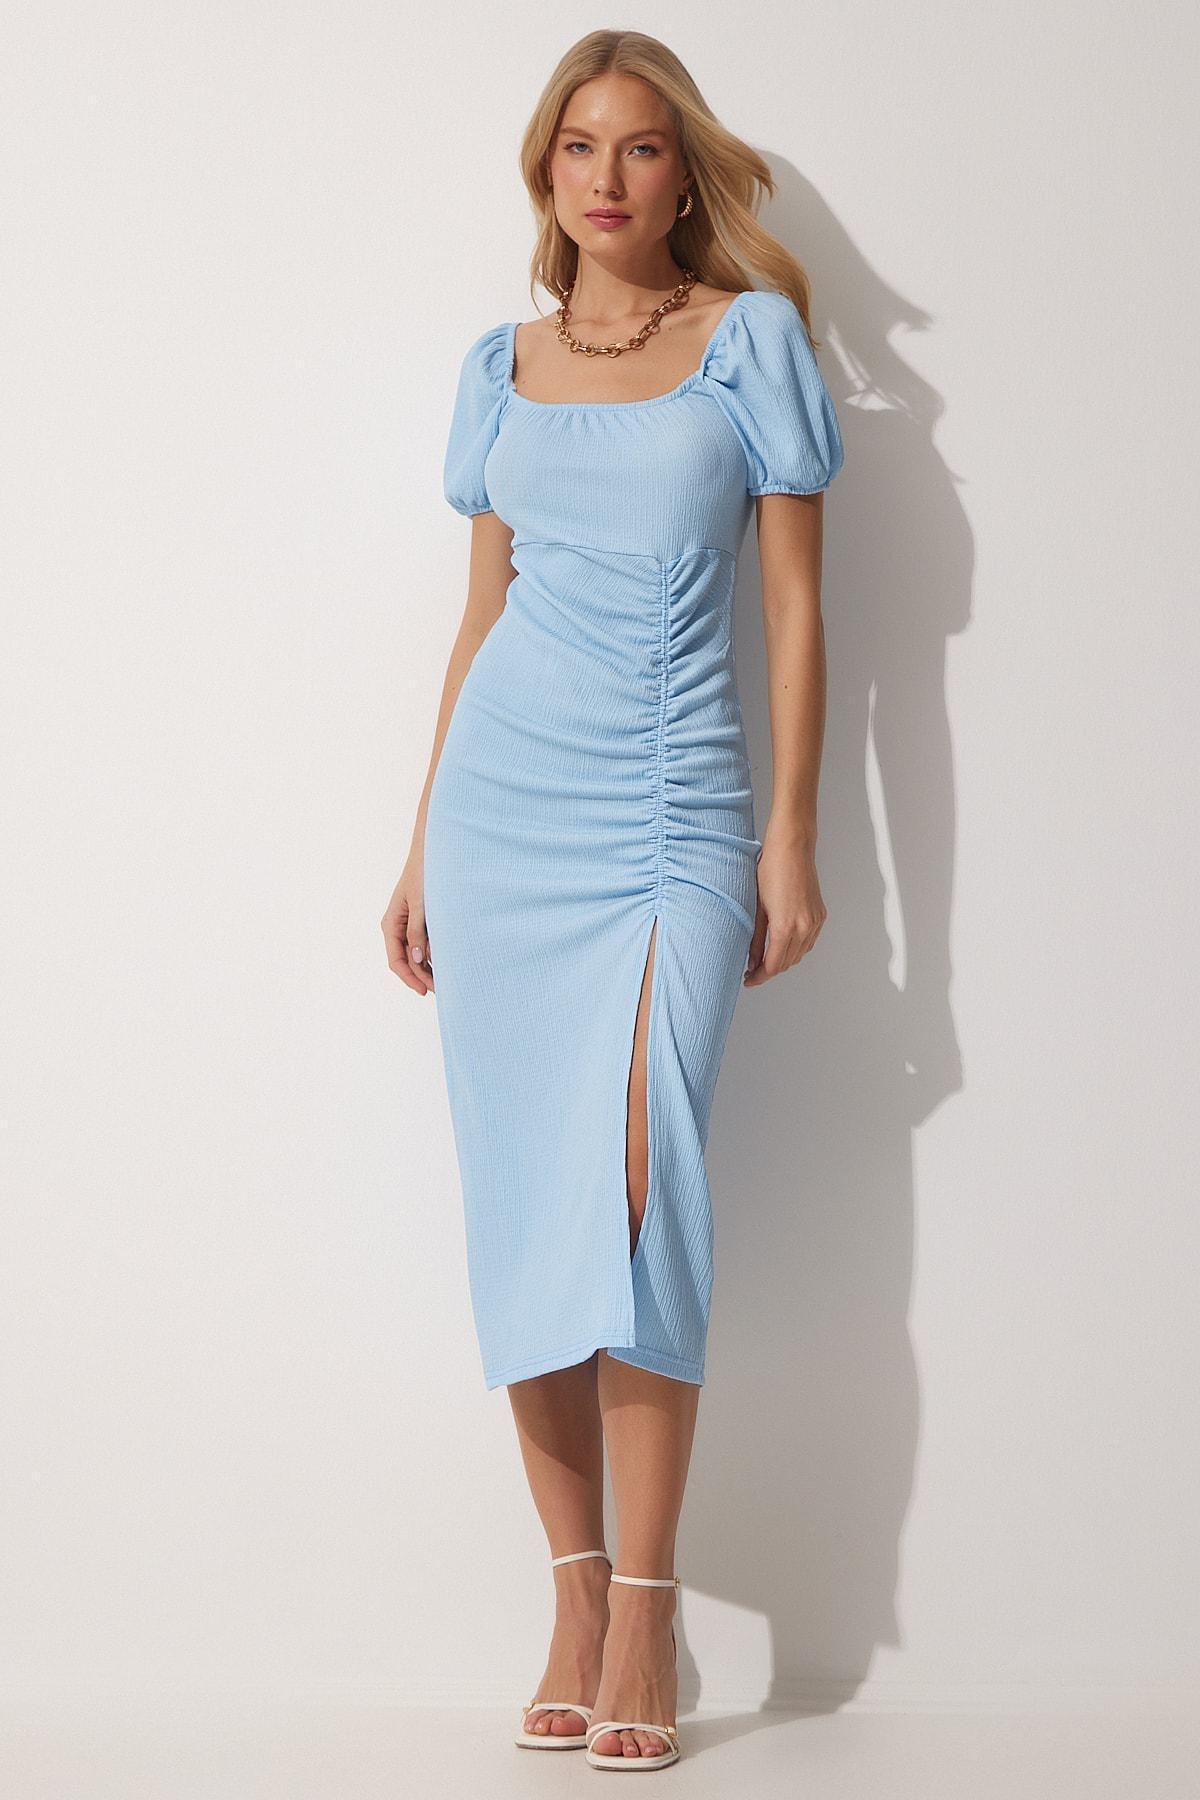 Happiness Istanbul - Blue Wrap Over Dress